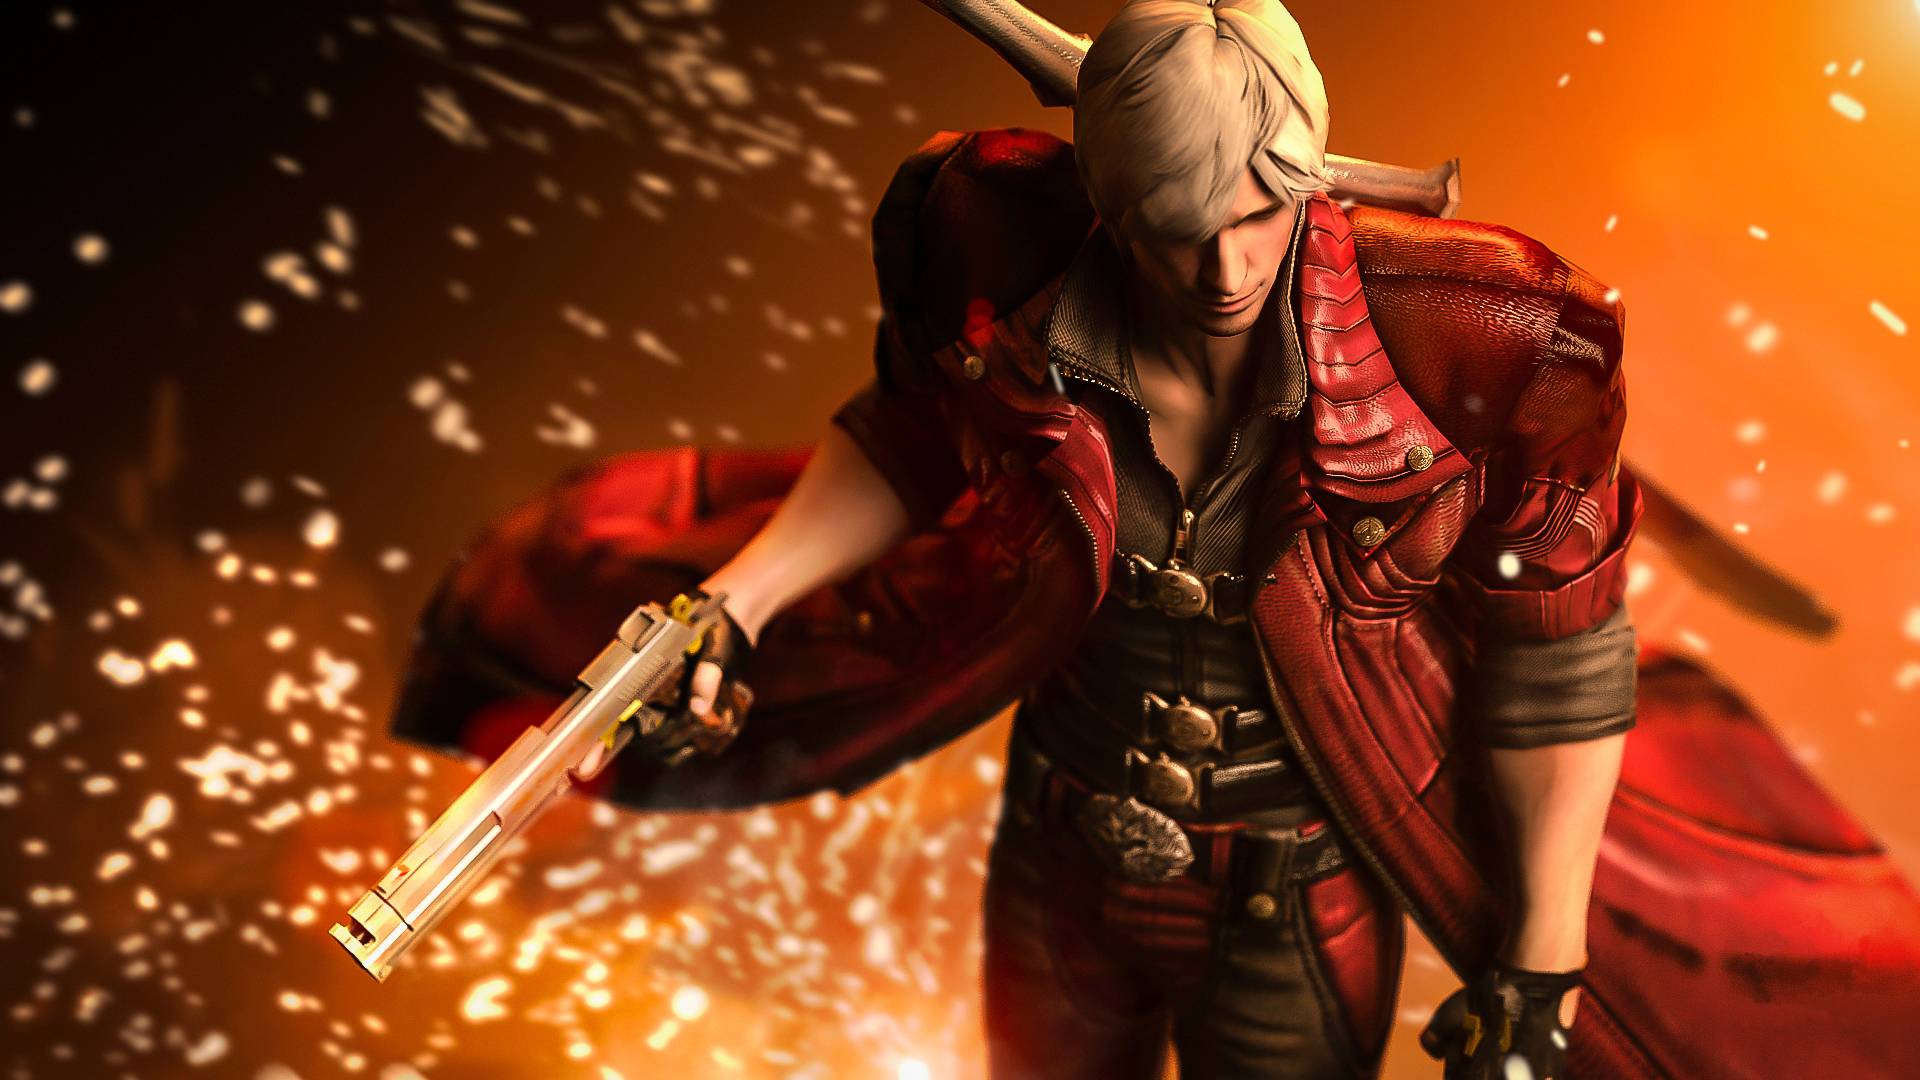 Devil May Cry Backgrounds - Wallpaper Cave